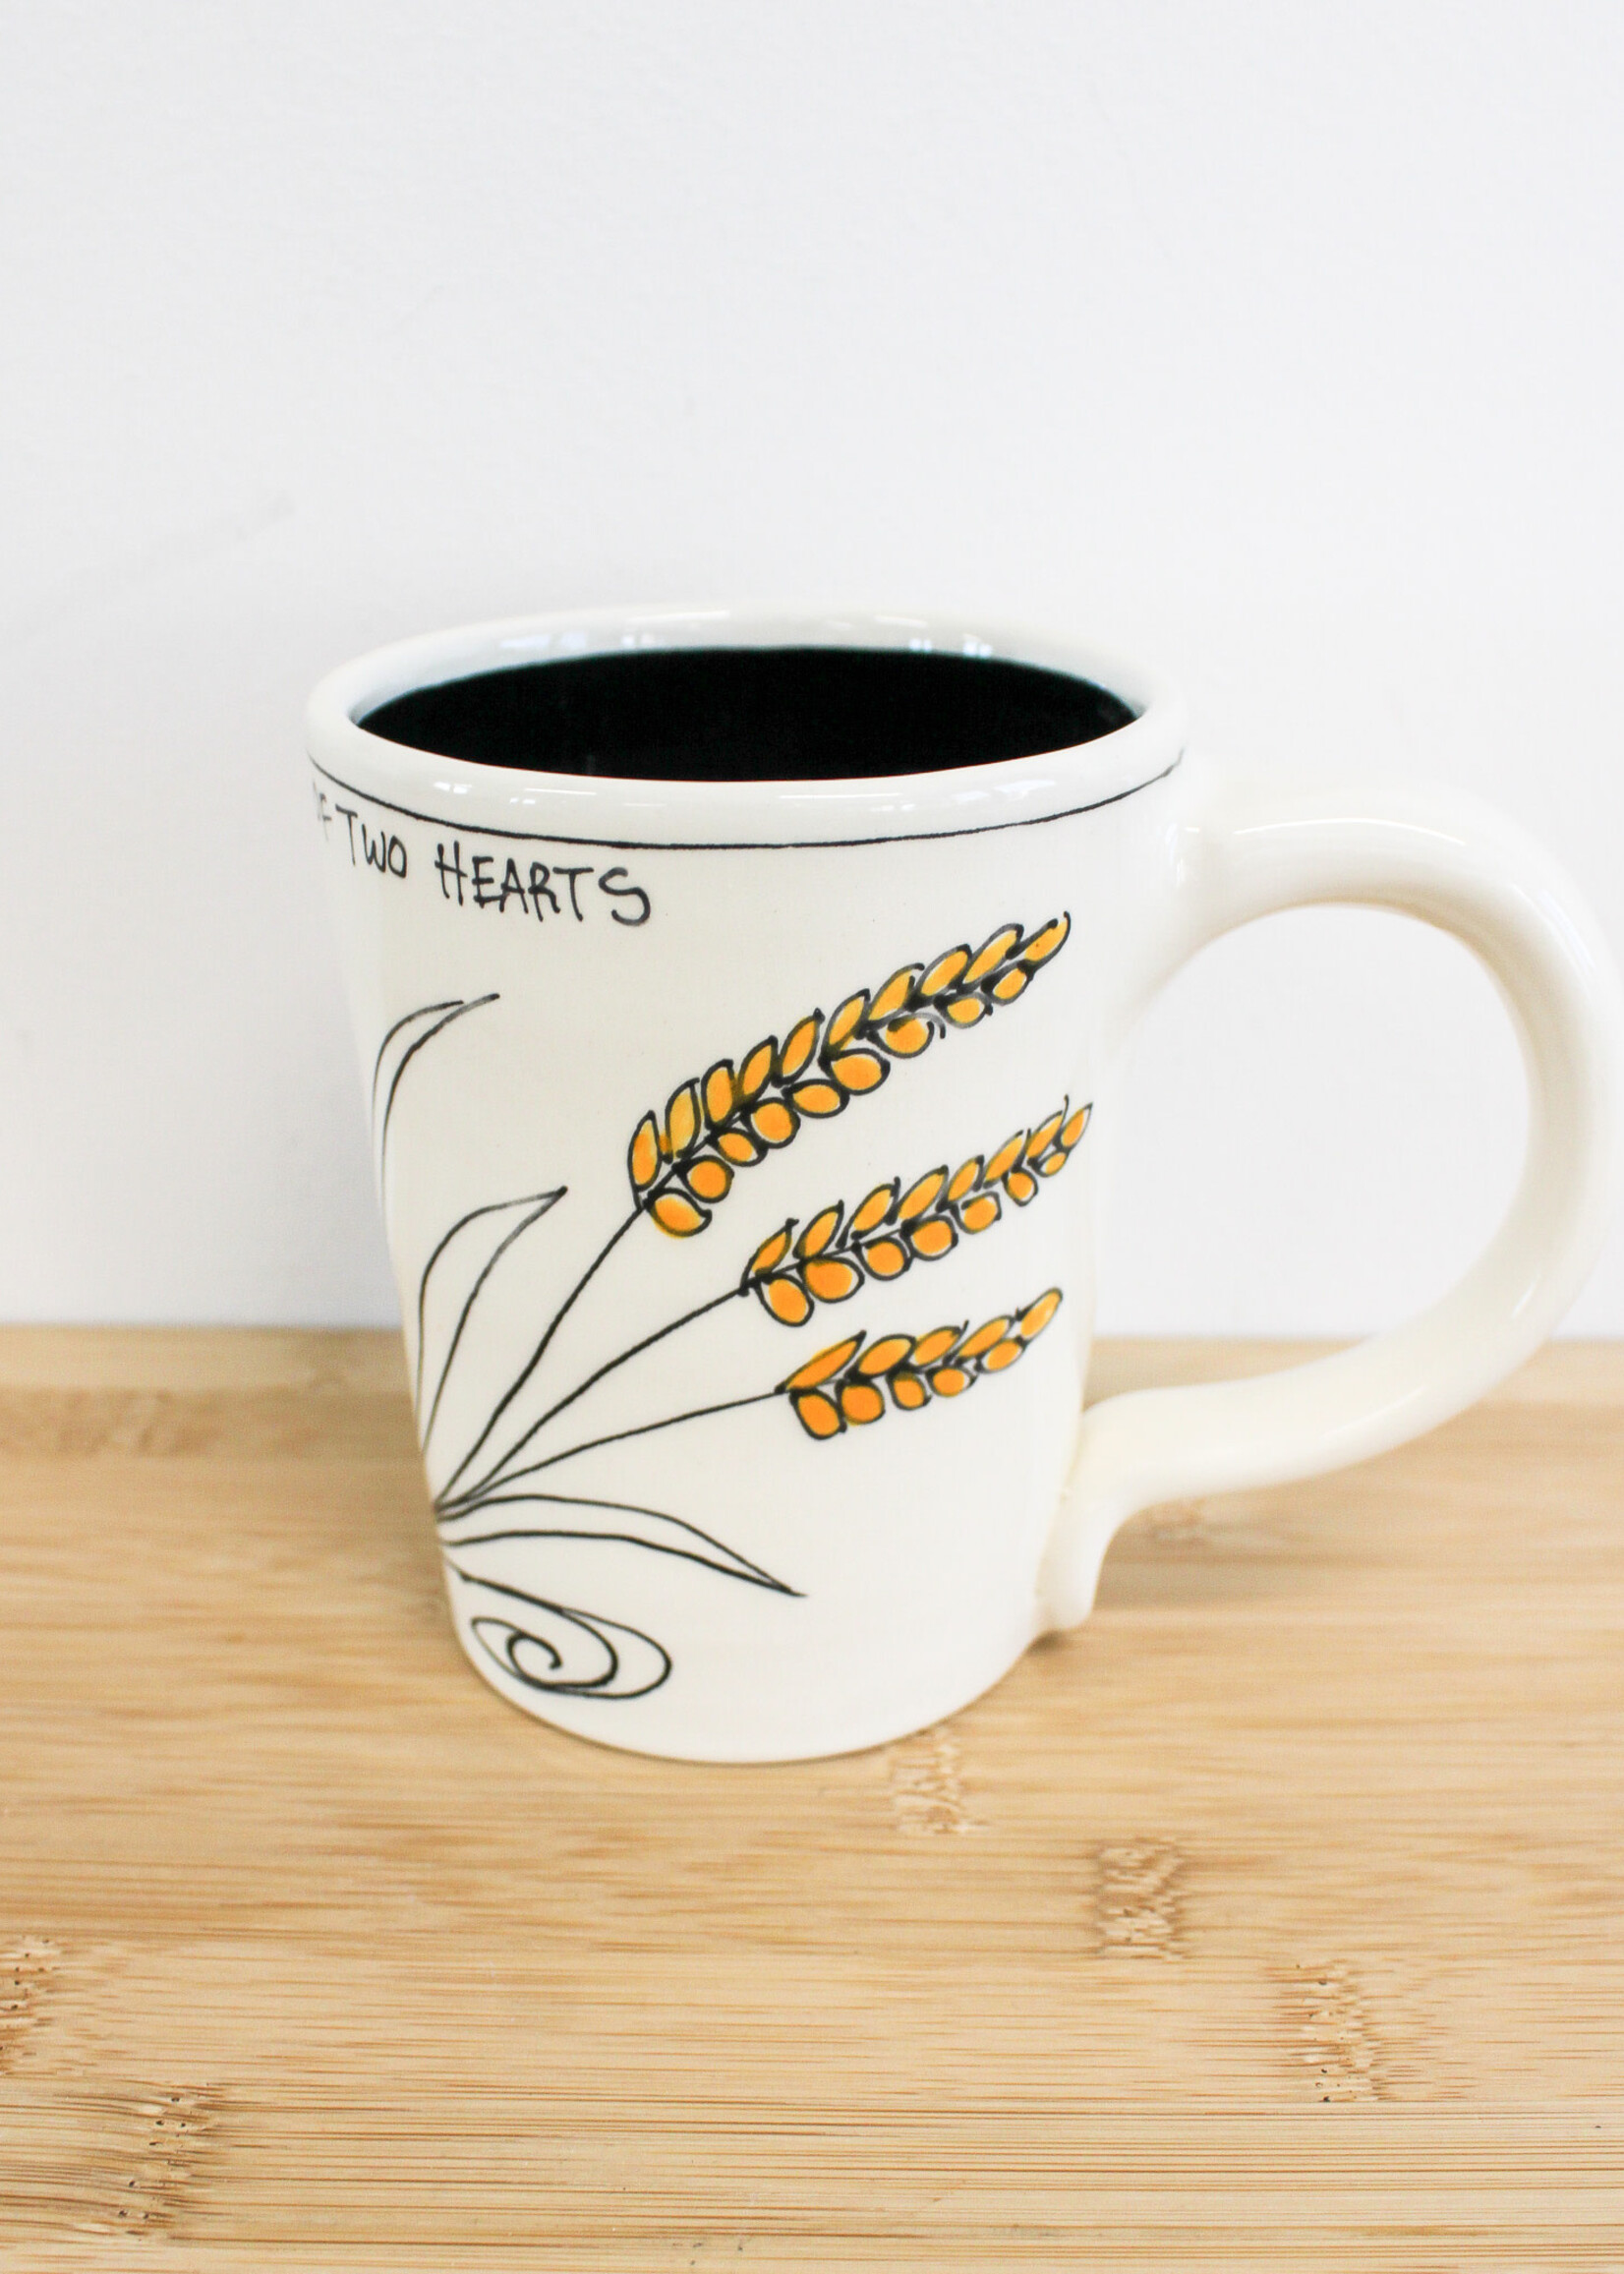 CERAMICS - Tall Mug, Poppies & Wheat  "The Roots of Family Begin with the Love of Two Hearts"